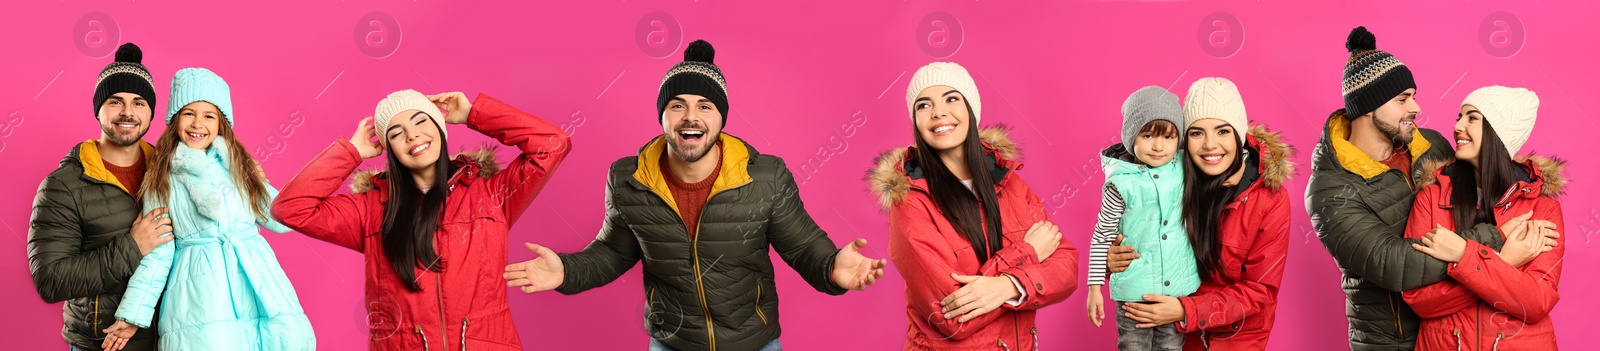 Image of Collage with photos of people wearing warm clothes on pink background, banner design. Winter vacation